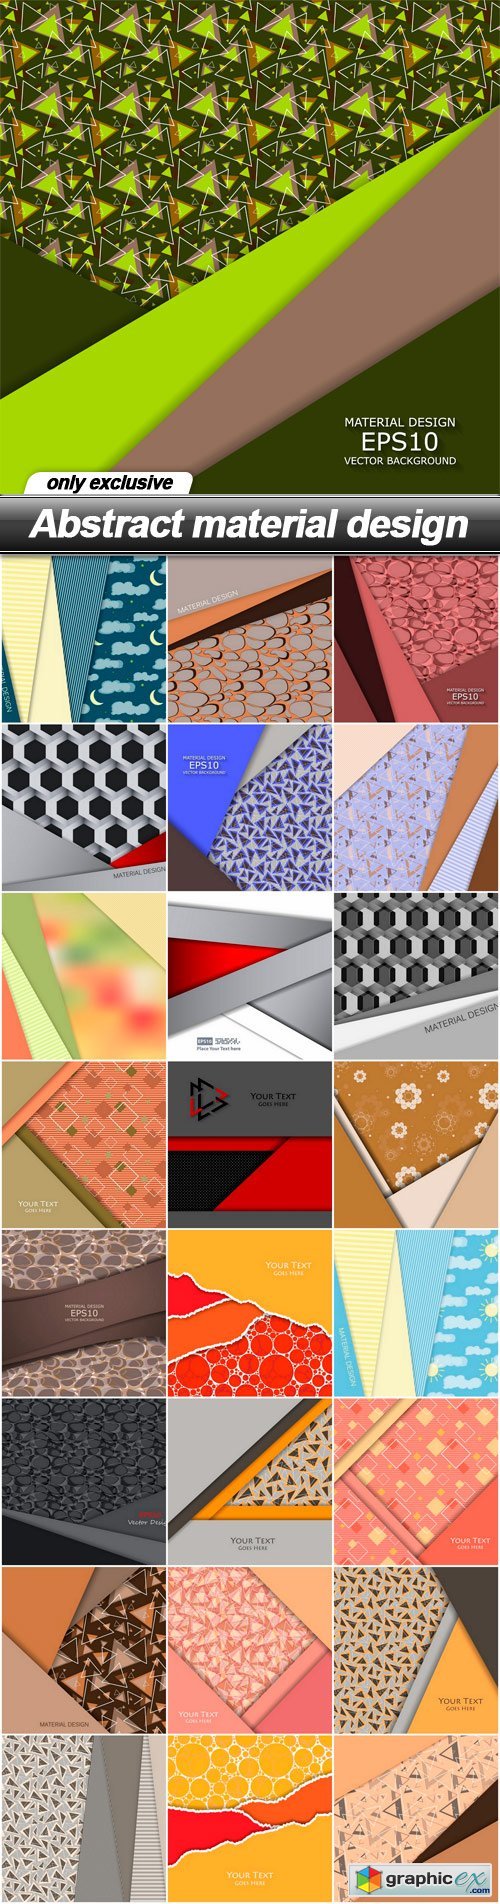 Abstract material design - 25 EPS